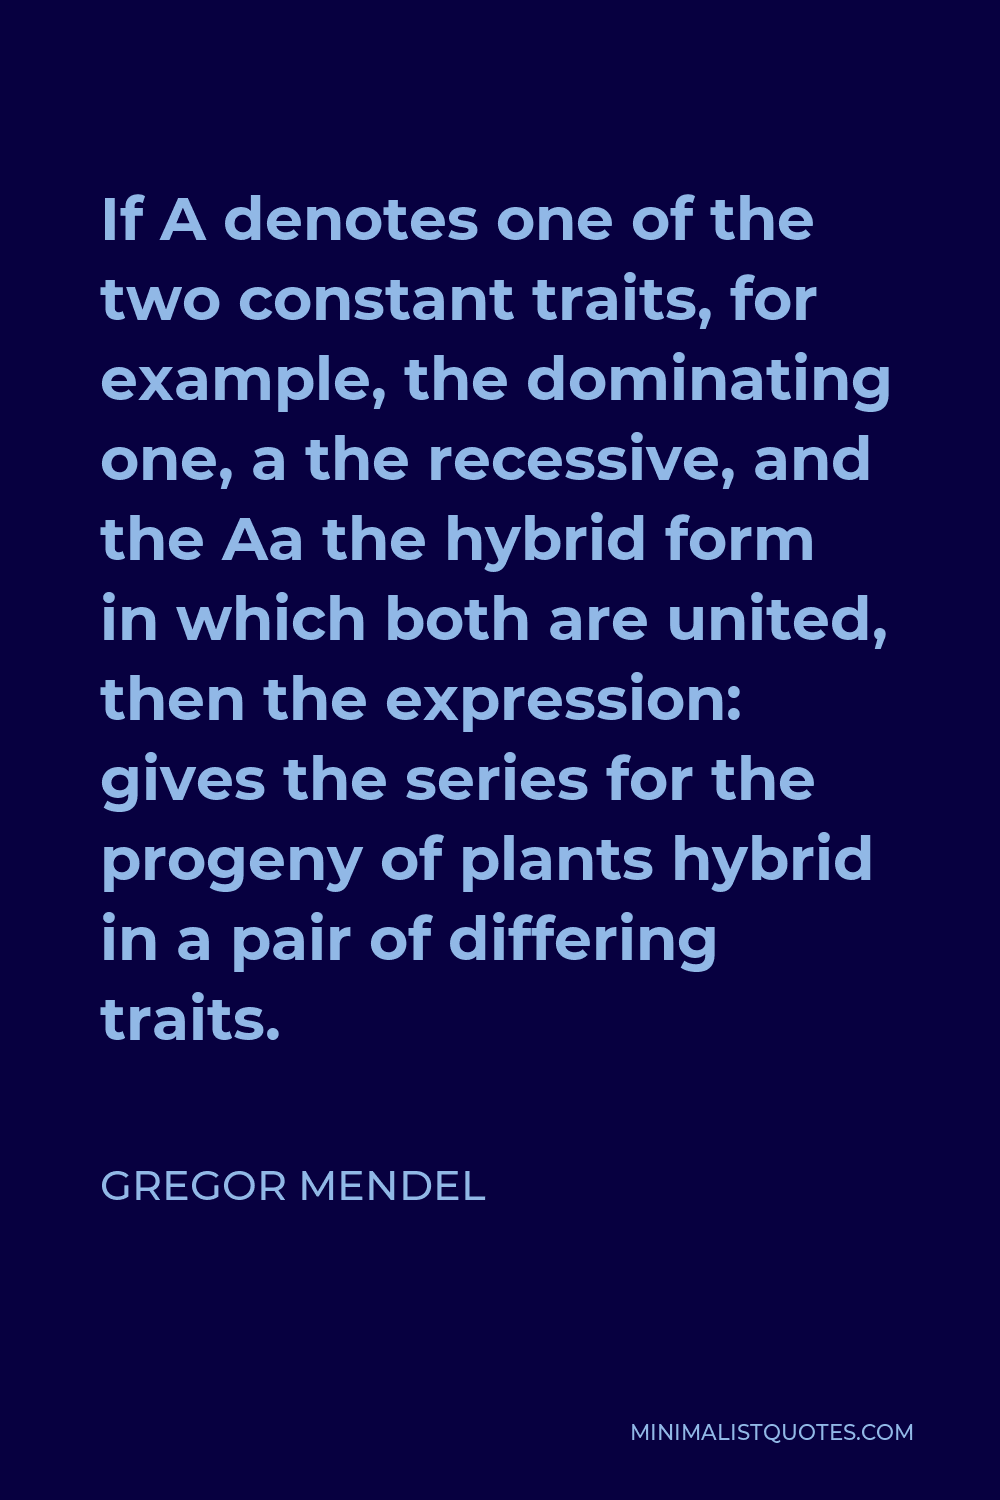 Gregor Mendel Quote - If A denotes one of the two constant traits, for example, the dominating one, a the recessive, and the Aa the hybrid form in which both are united, then the expression: gives the series for the progeny of plants hybrid in a pair of differing traits.